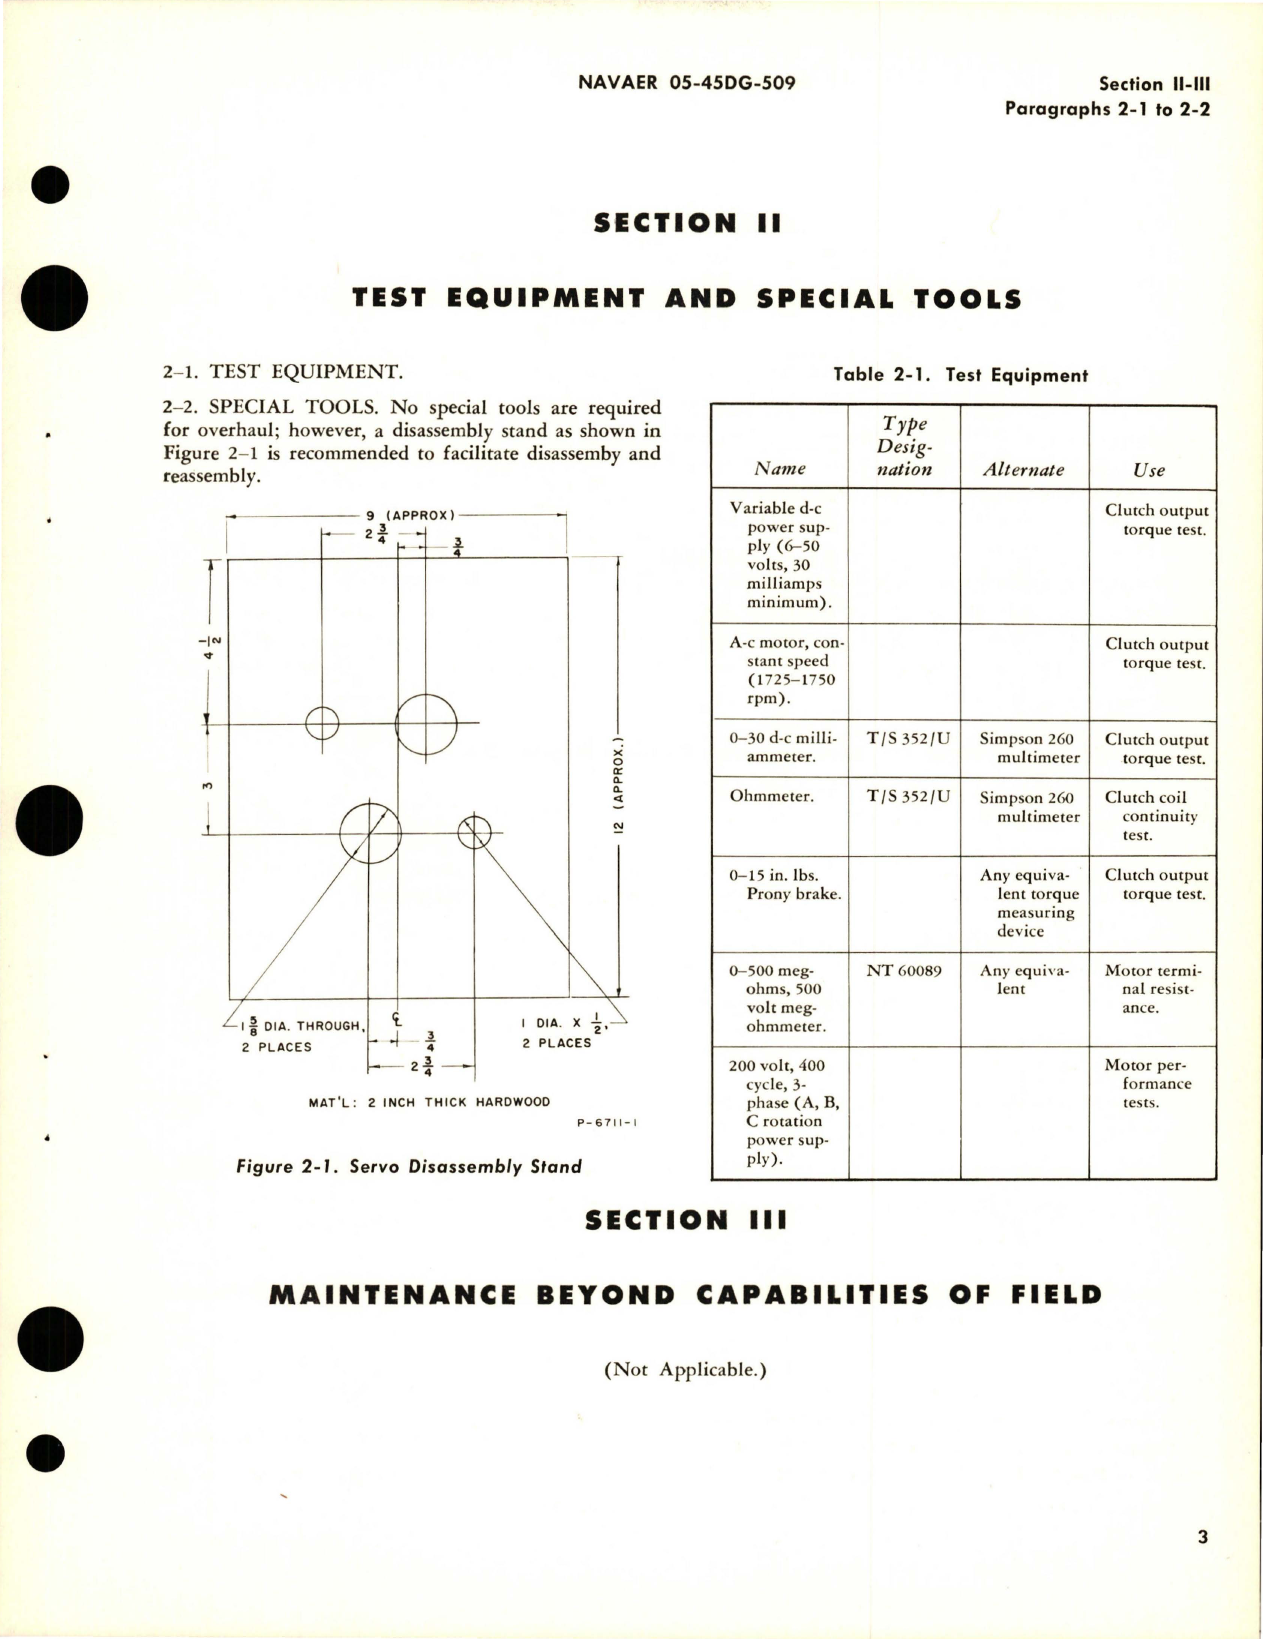 Sample page 9 from AirCorps Library document: Overhaul Instructions for Servo Mechanism Assembly for D-1 Auto Control System